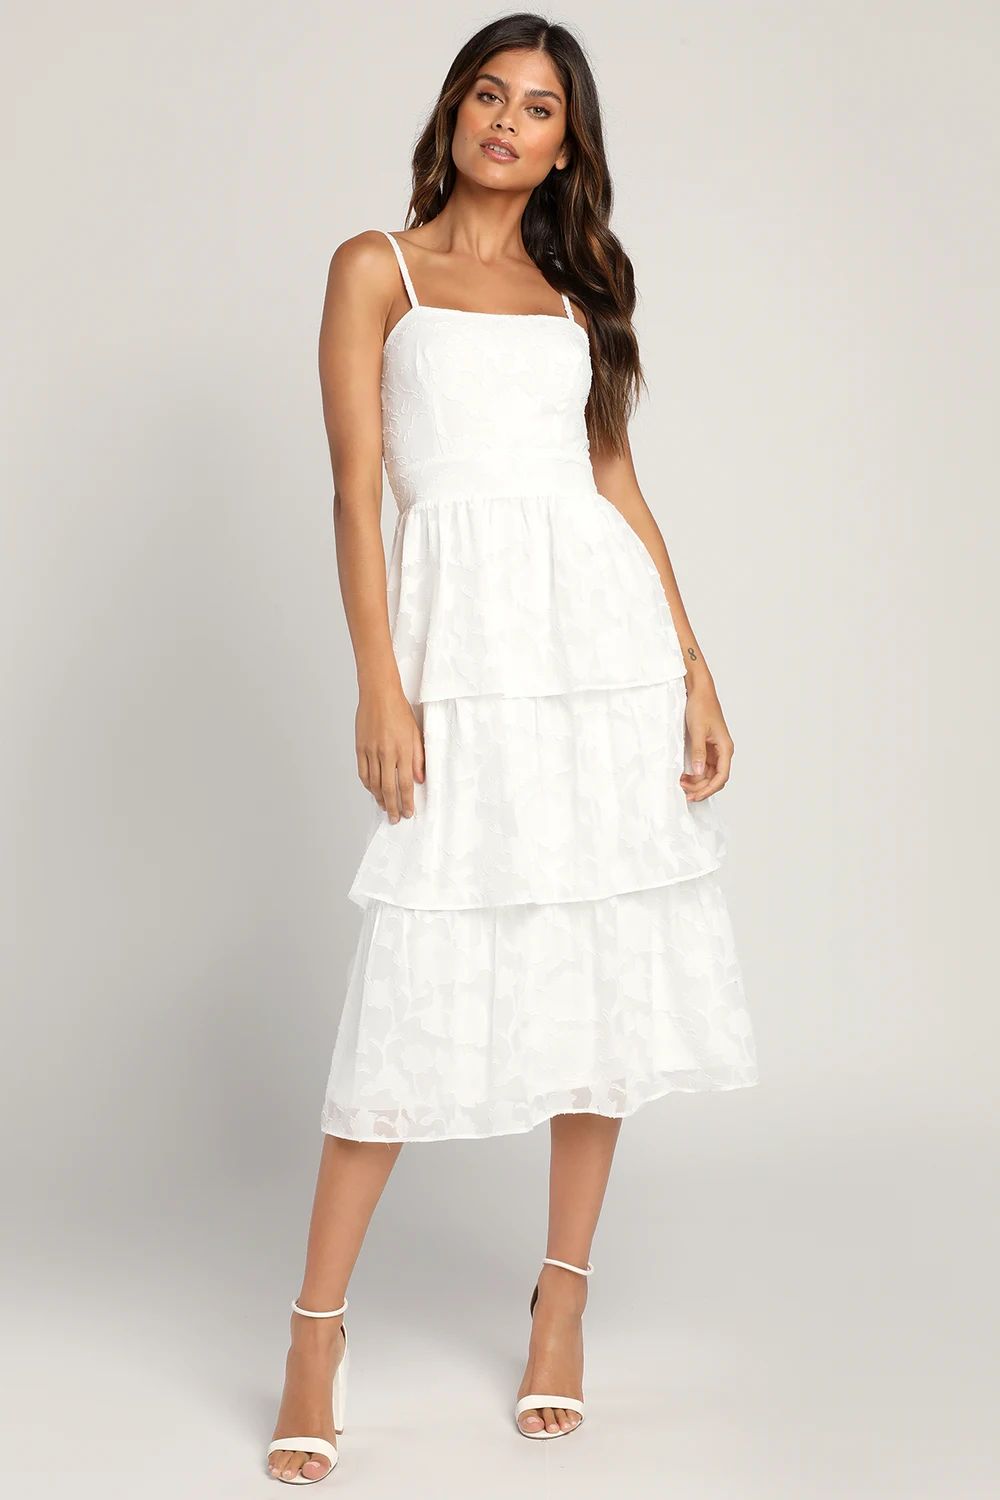 Grace and Beauty White Burnout Floral Print Tiered Dress | Lulus